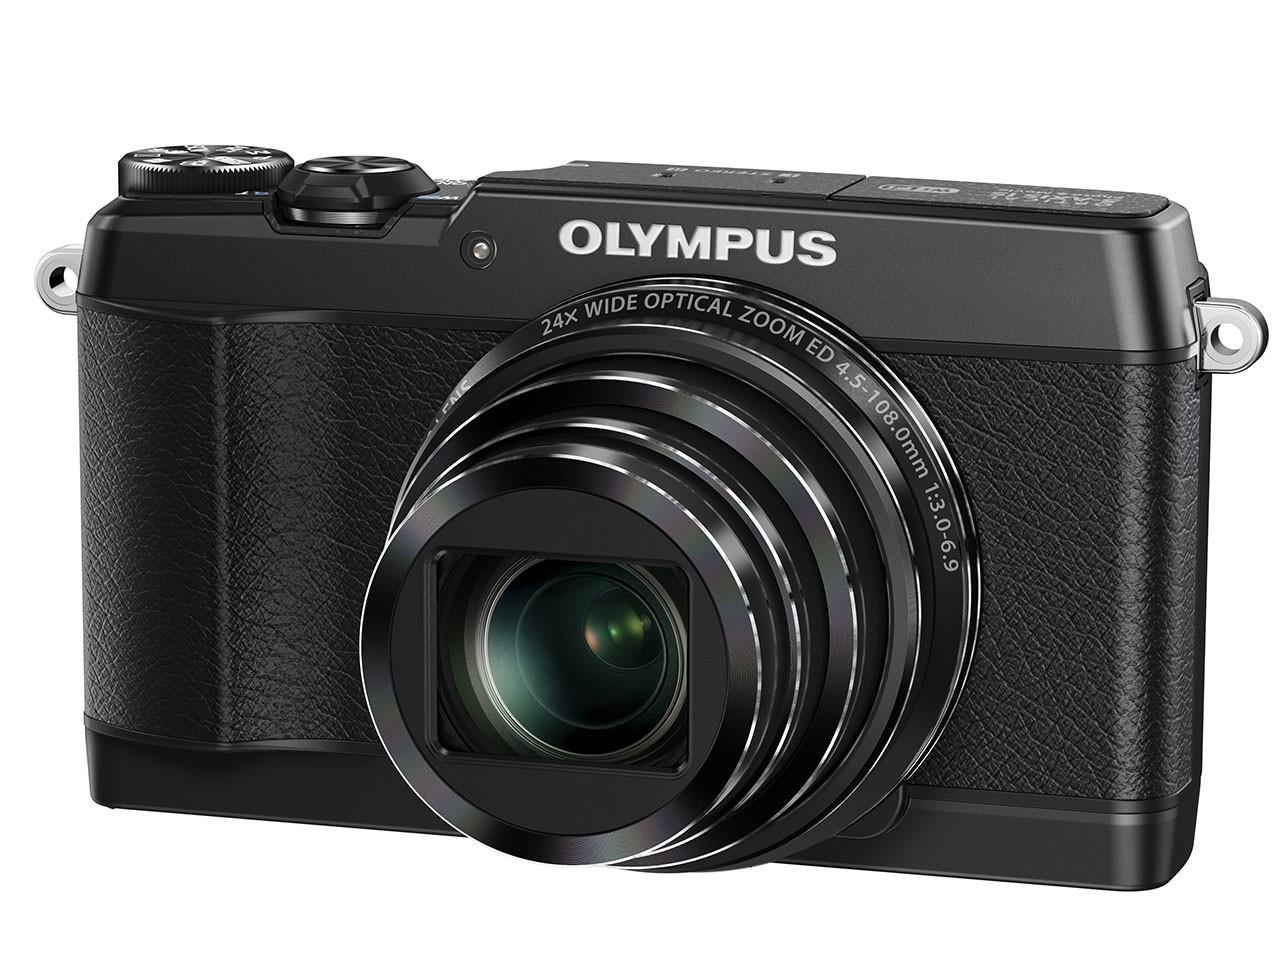 Olympus Stylus SH-1 boasts 5-axis stabilization for better videos